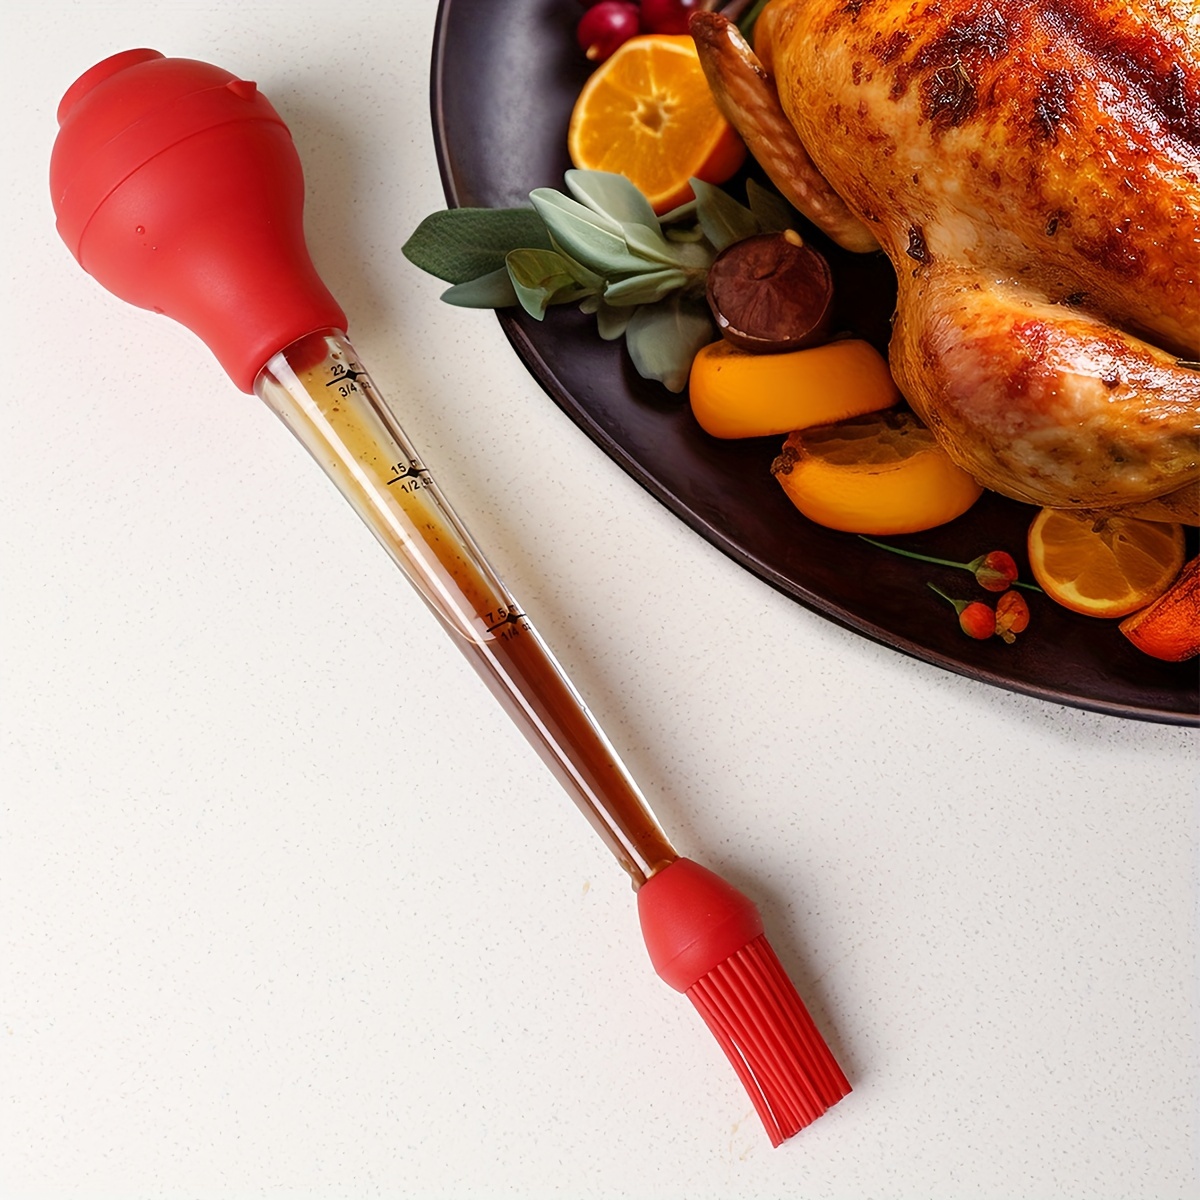 Dropship Silicone Cooking Brush Baking Roasting Grilling Baster With  Marinade Needles For Turkey, Beef, Pork, Chicken to Sell Online at a Lower  Price